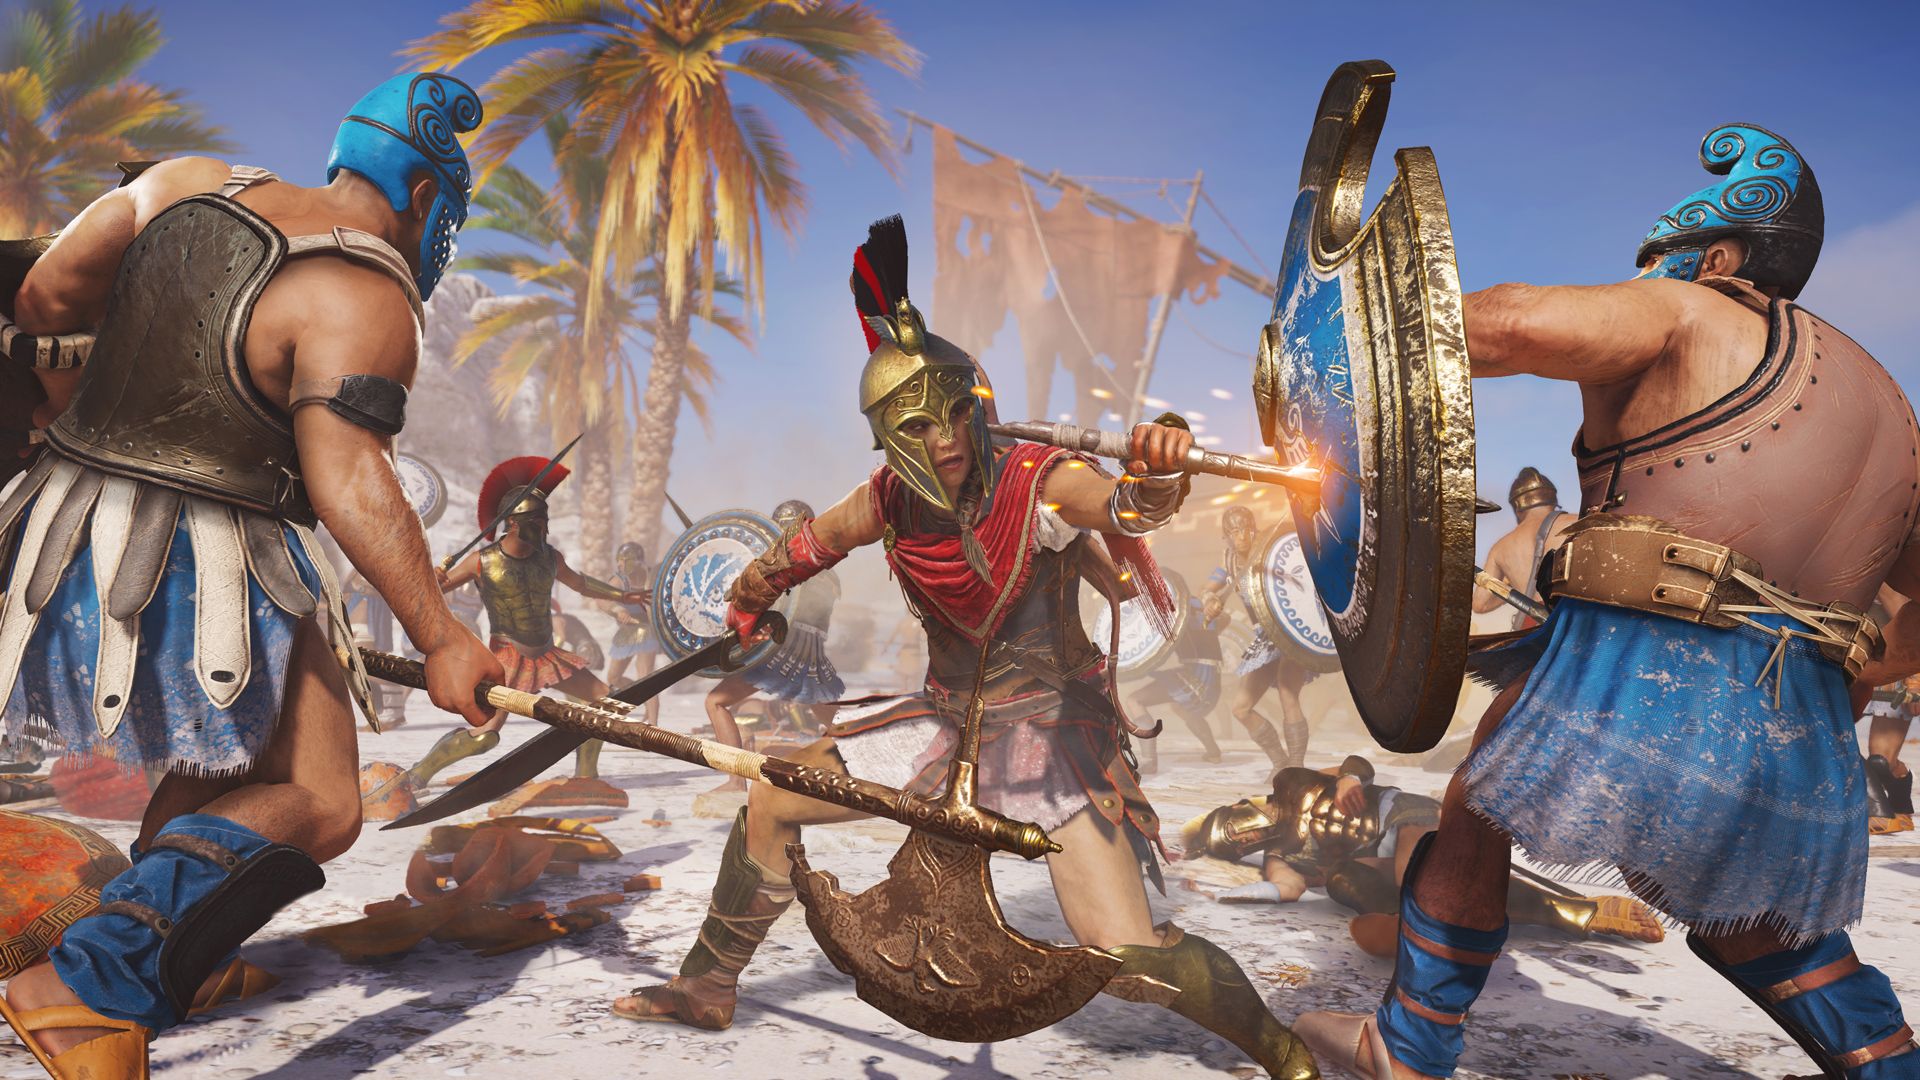 Video game screenshot of a female ancient Greek warrior wielding an axe against enemies holding shields